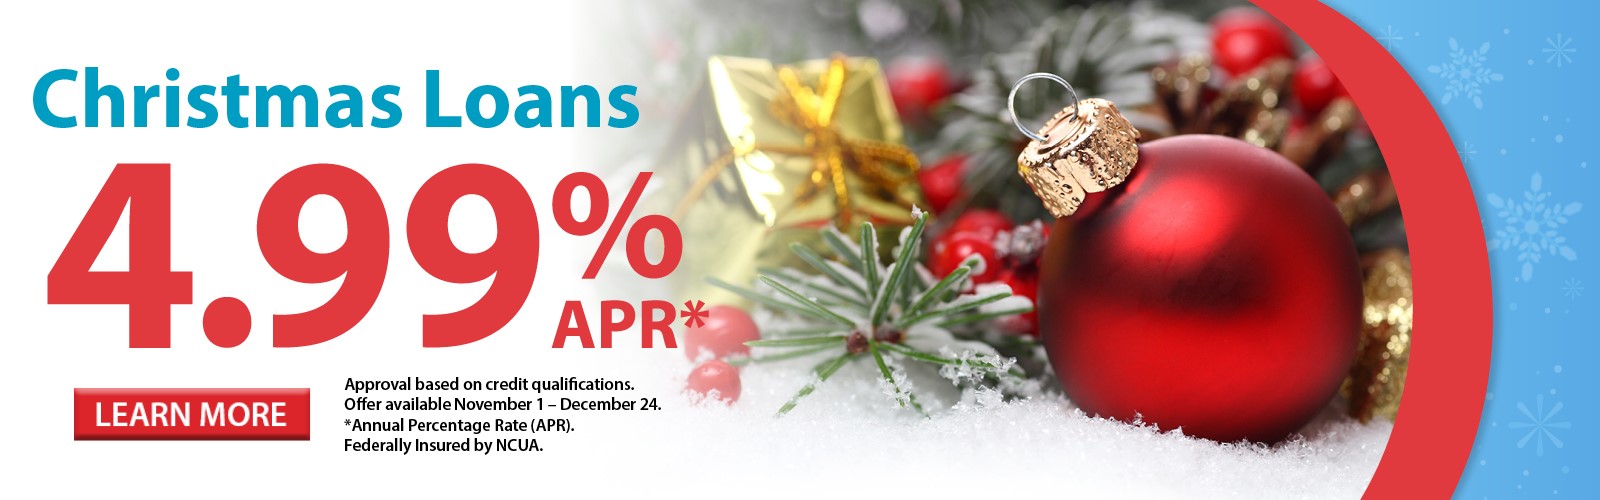 Need a little extra cash this holiday season? We can help with a Christmas Loan! Click here to learn more!